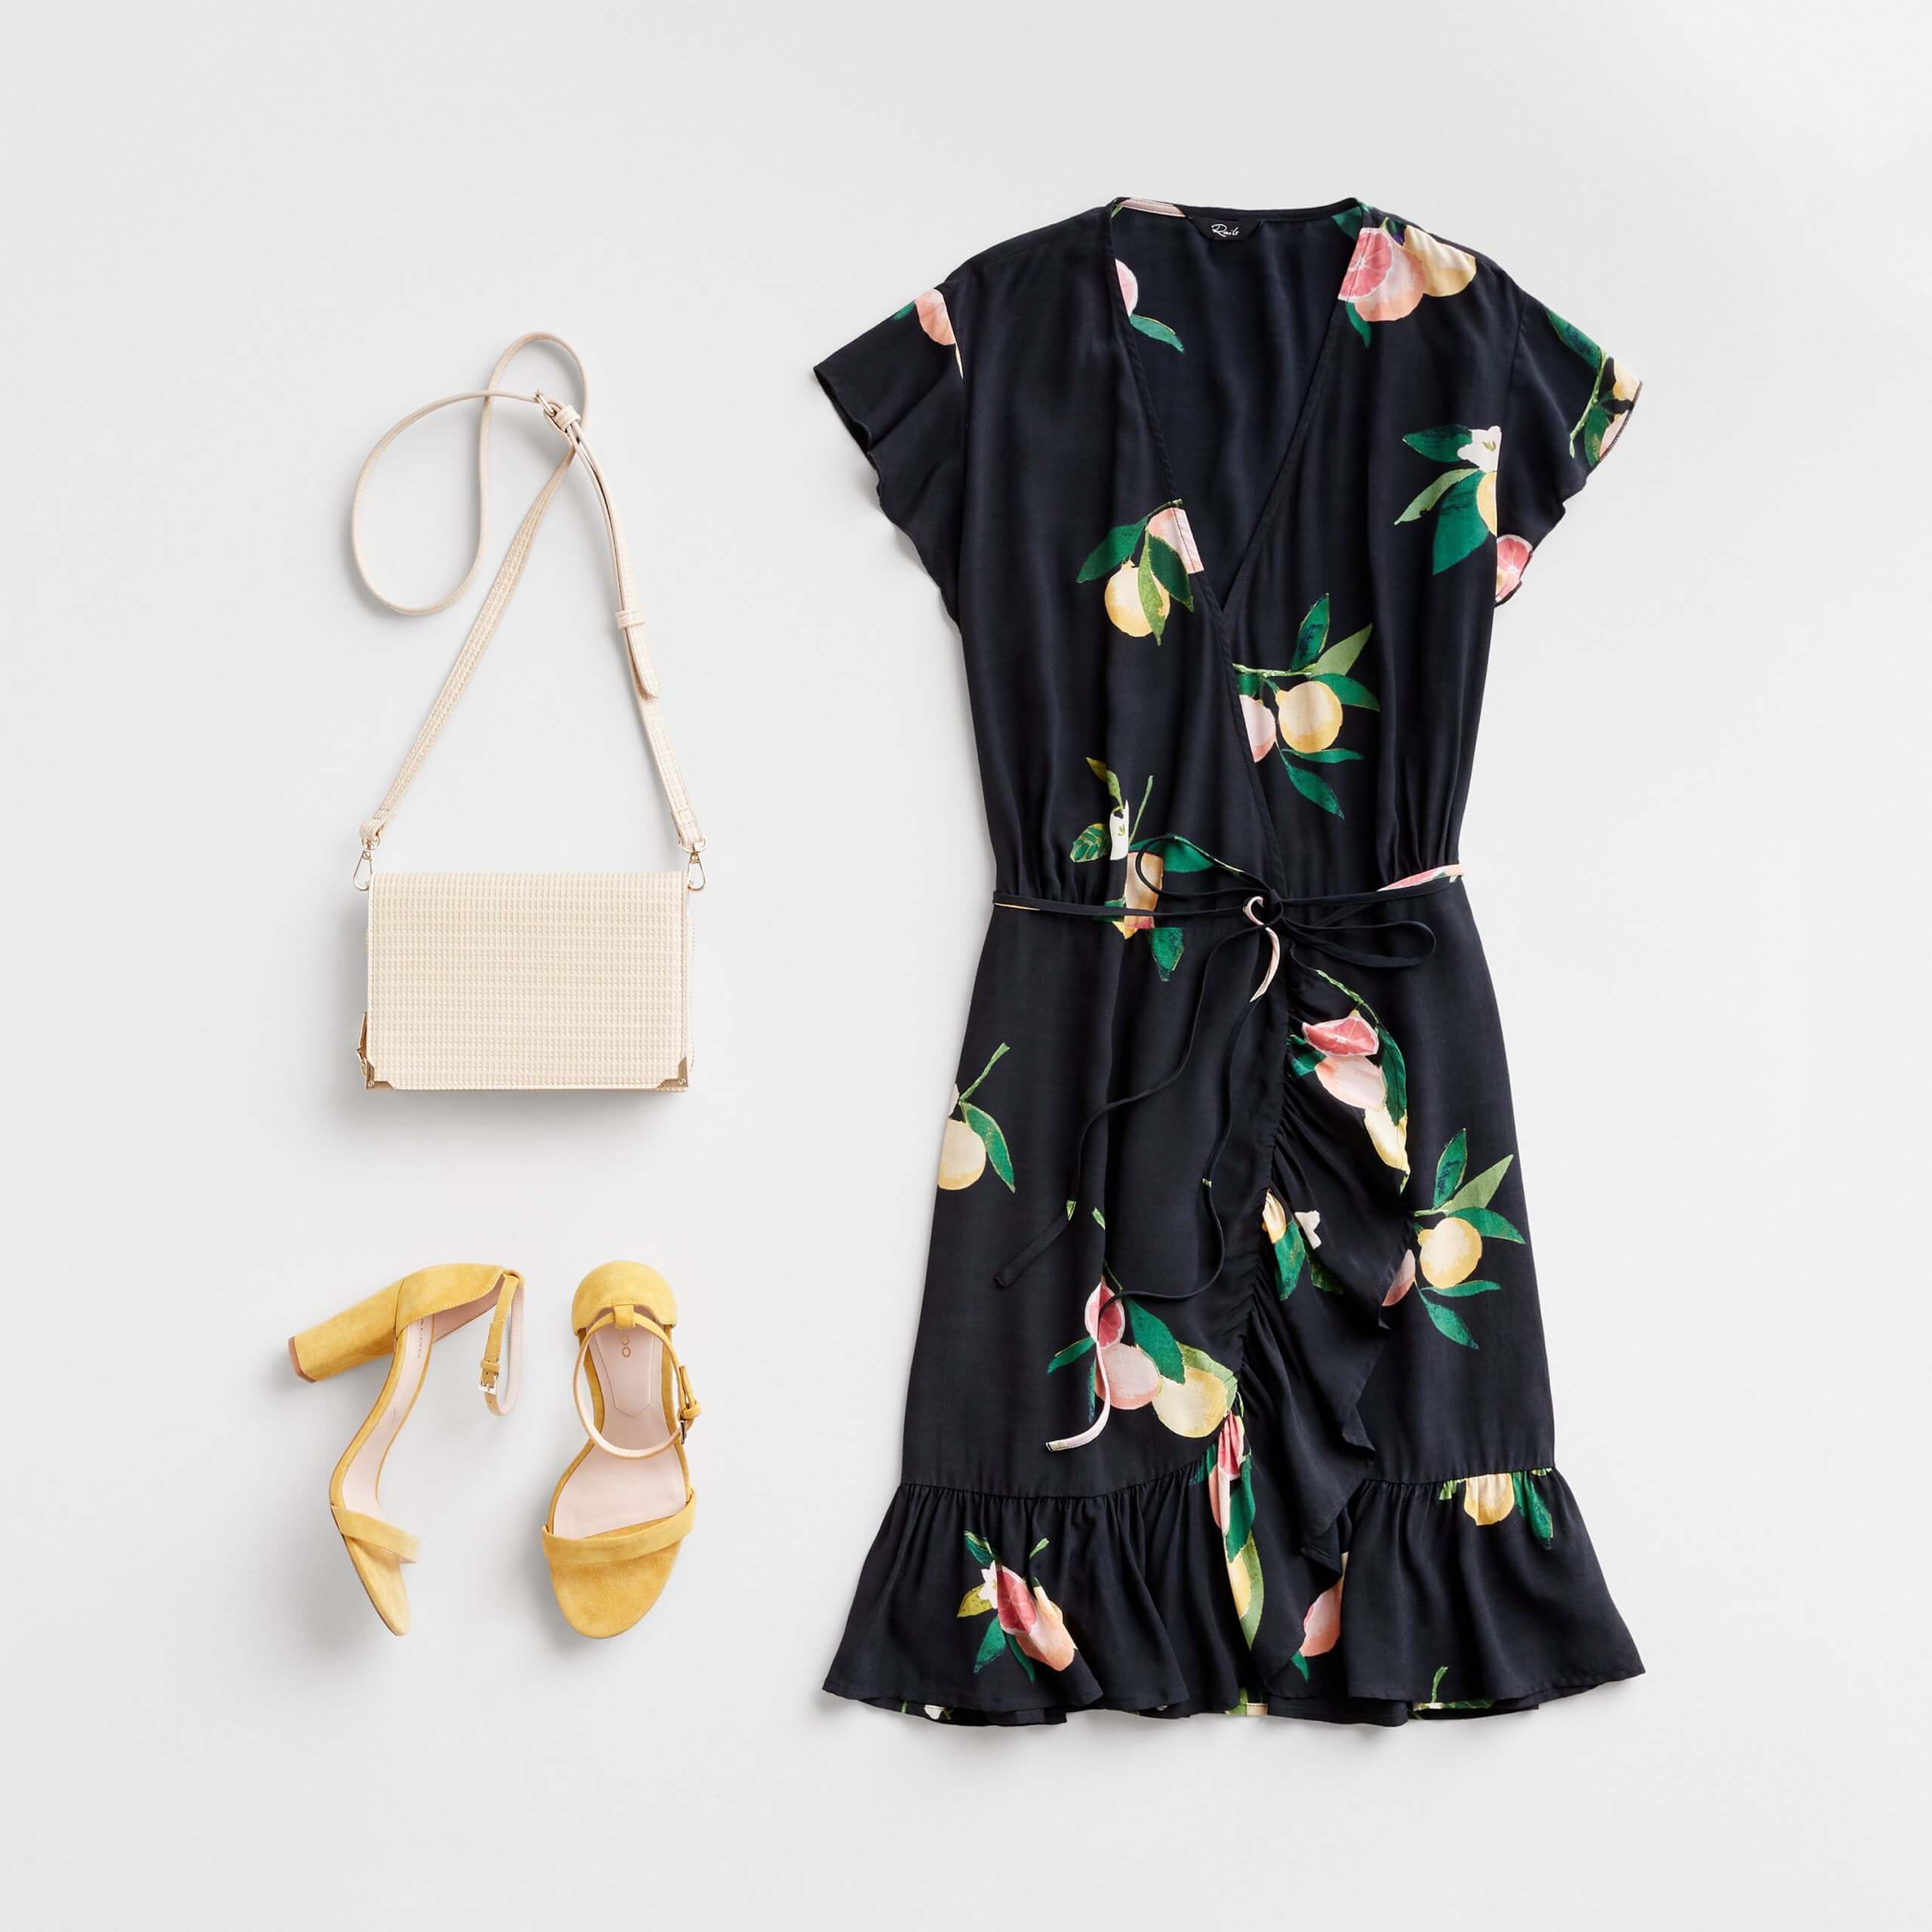 Stitch Fix Women's outfit laydown featuring black lemon-printed wrap dress with yellow block heels and cream crossbody bag.